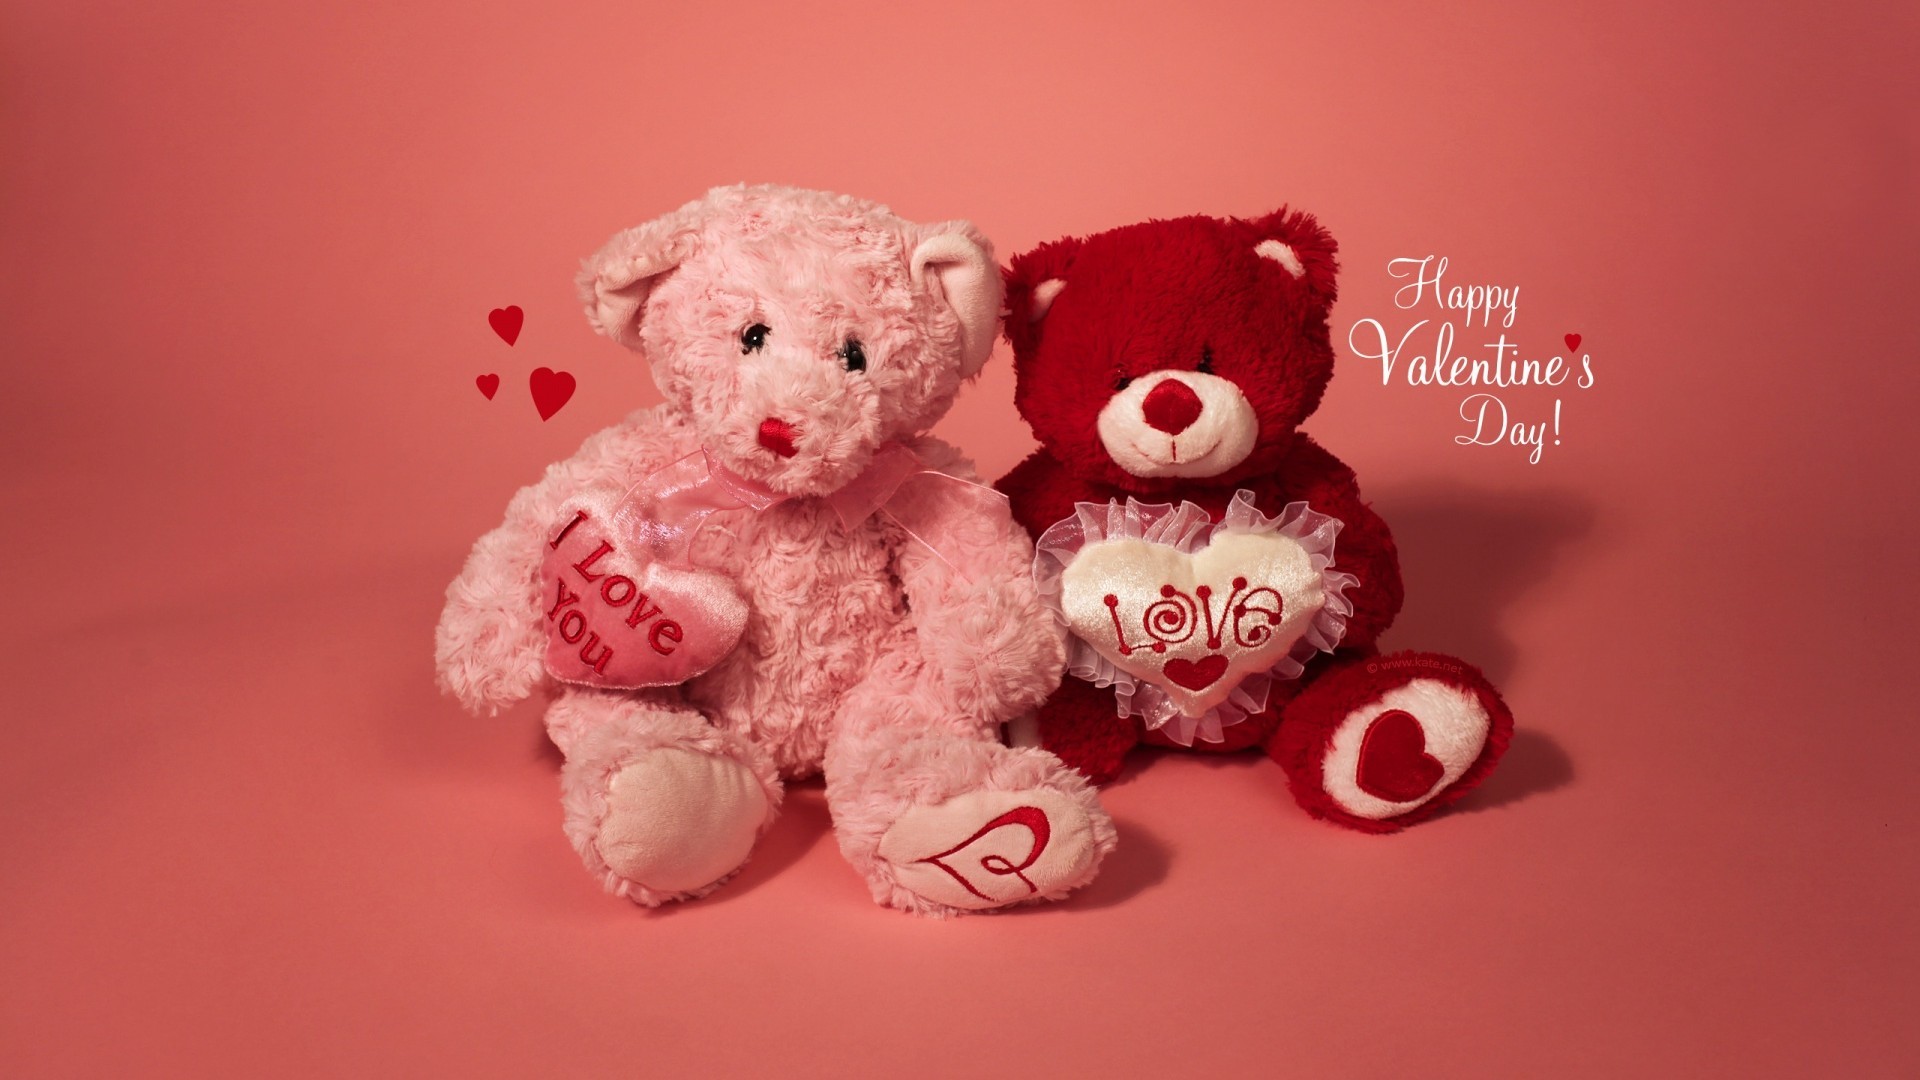 Free Download Valentines Day Teddy Bear Wallpaper – Valentines Day Teddy Bear Wallpaper for Desktop